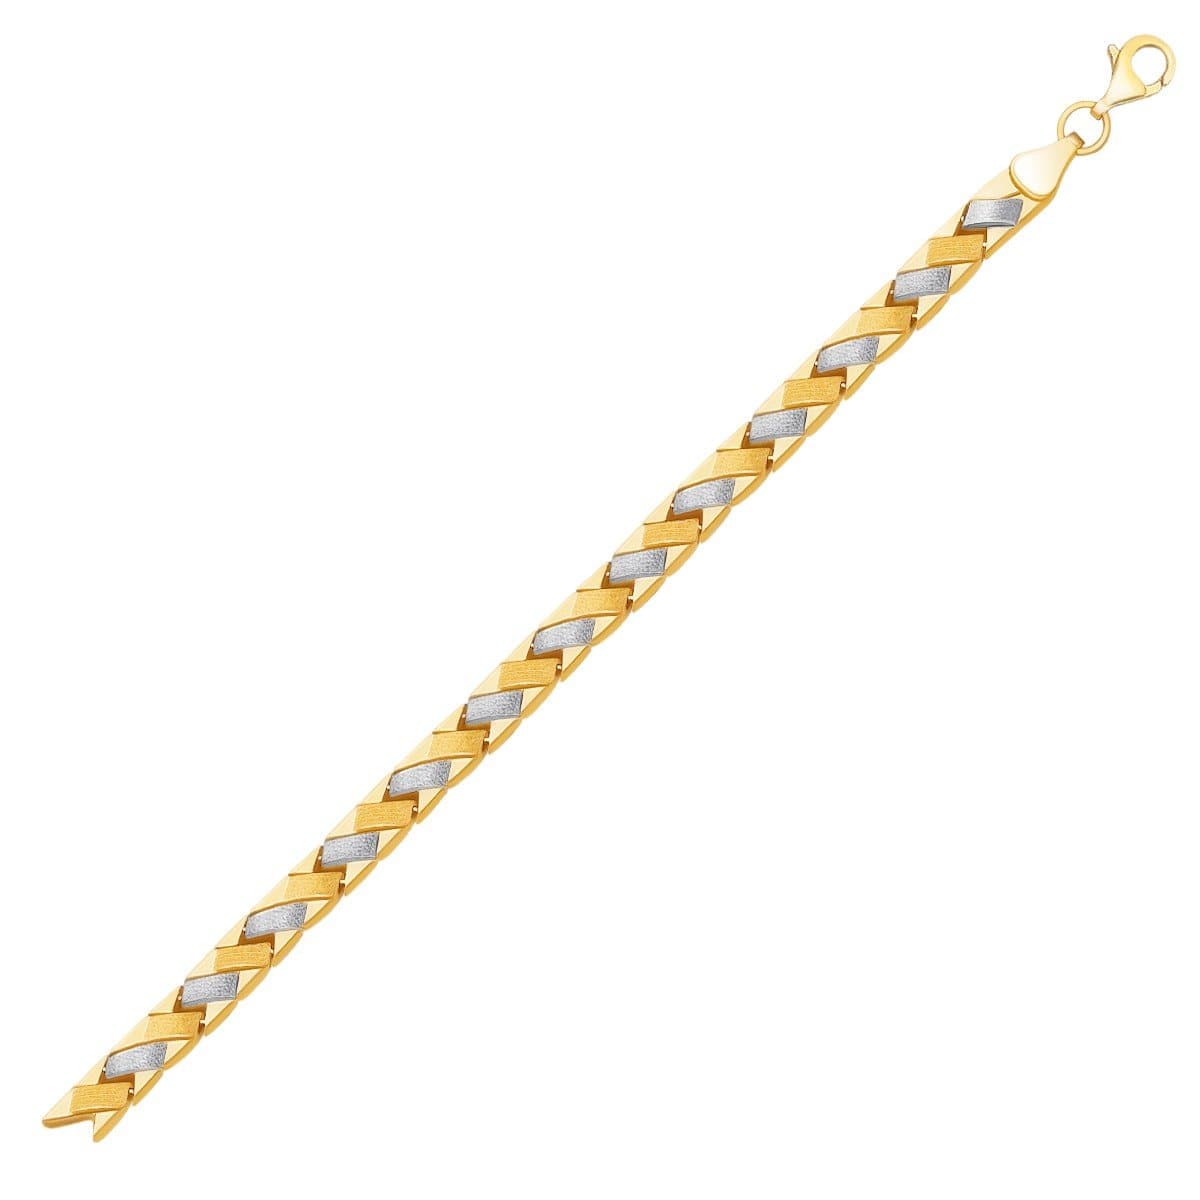 14k Two-Tone Gold Fancy Weave Bracelet with Contrasting Finish